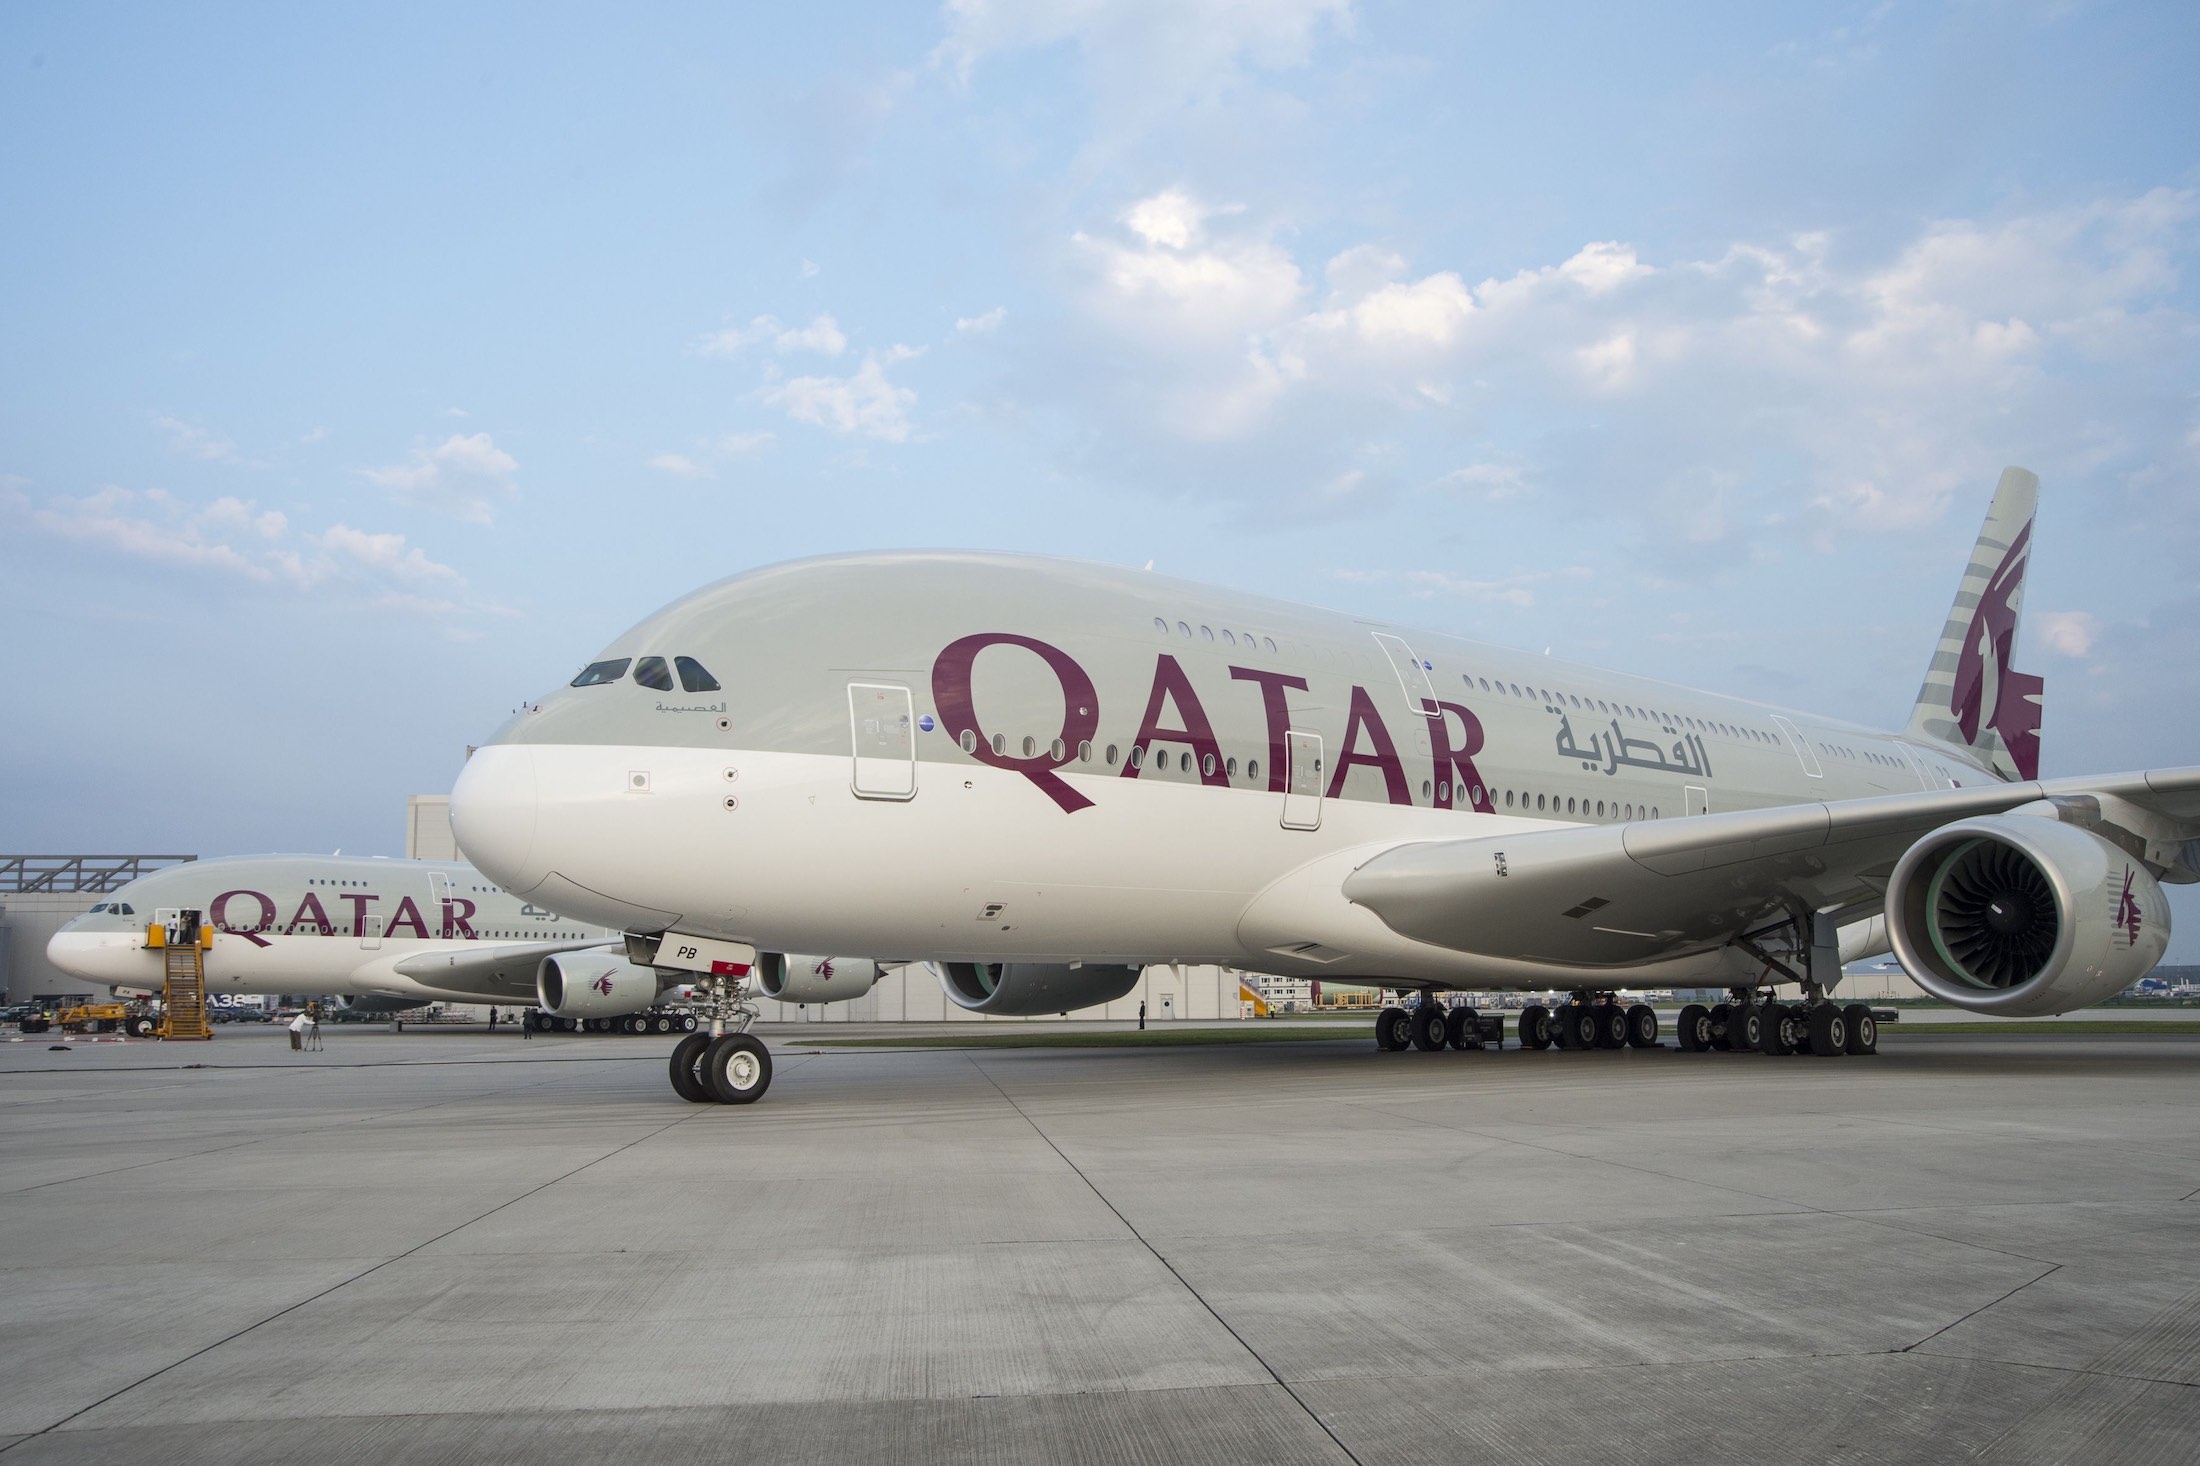 Qatar Airways Announces Surprise Return Of Airbus A380 Live and Let's Fly